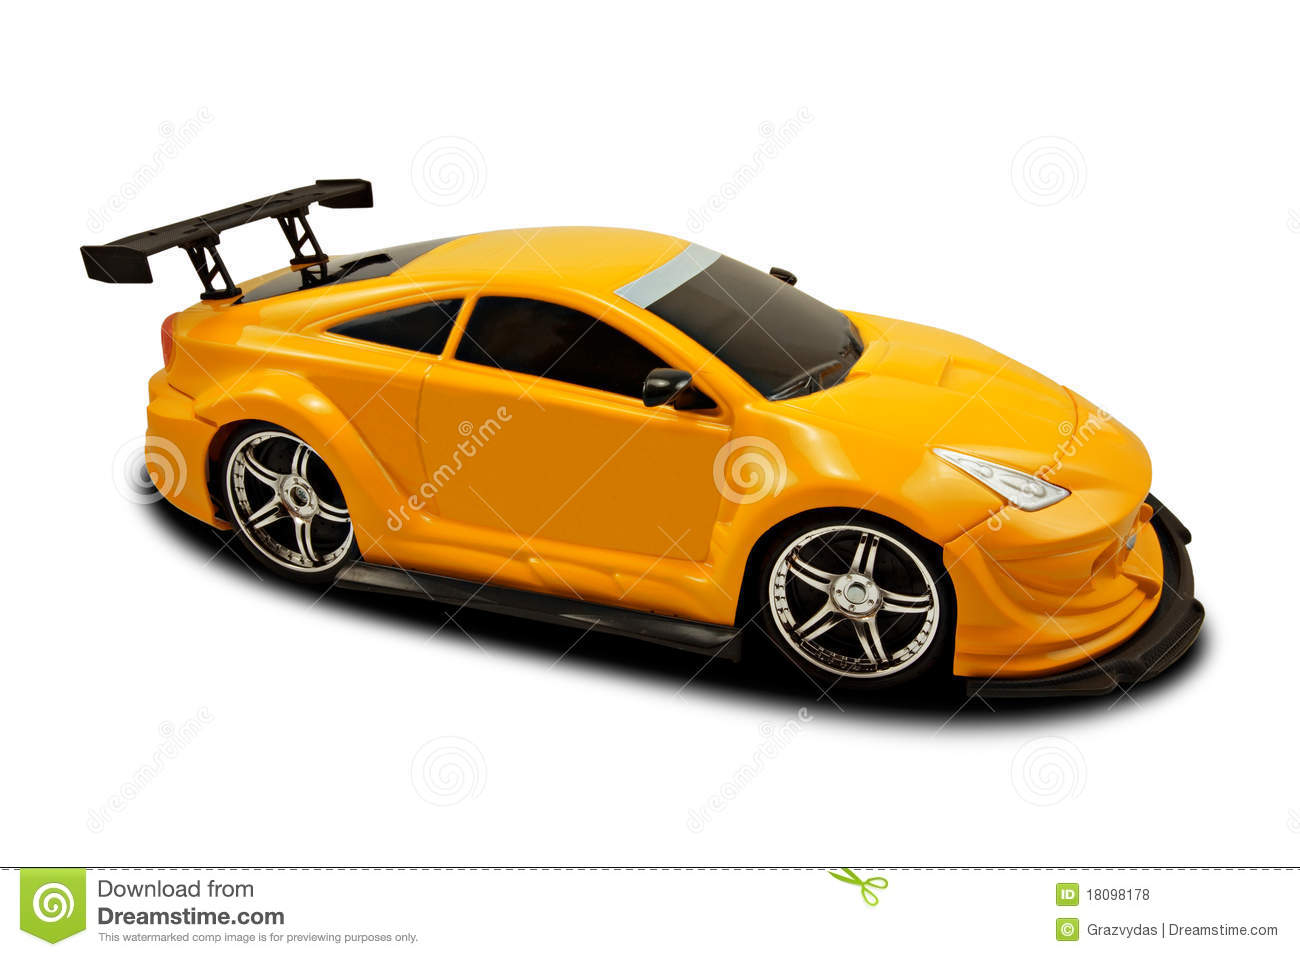 Yellow Fast Sports Car Royalty Free Stock Photos   Image  18098178